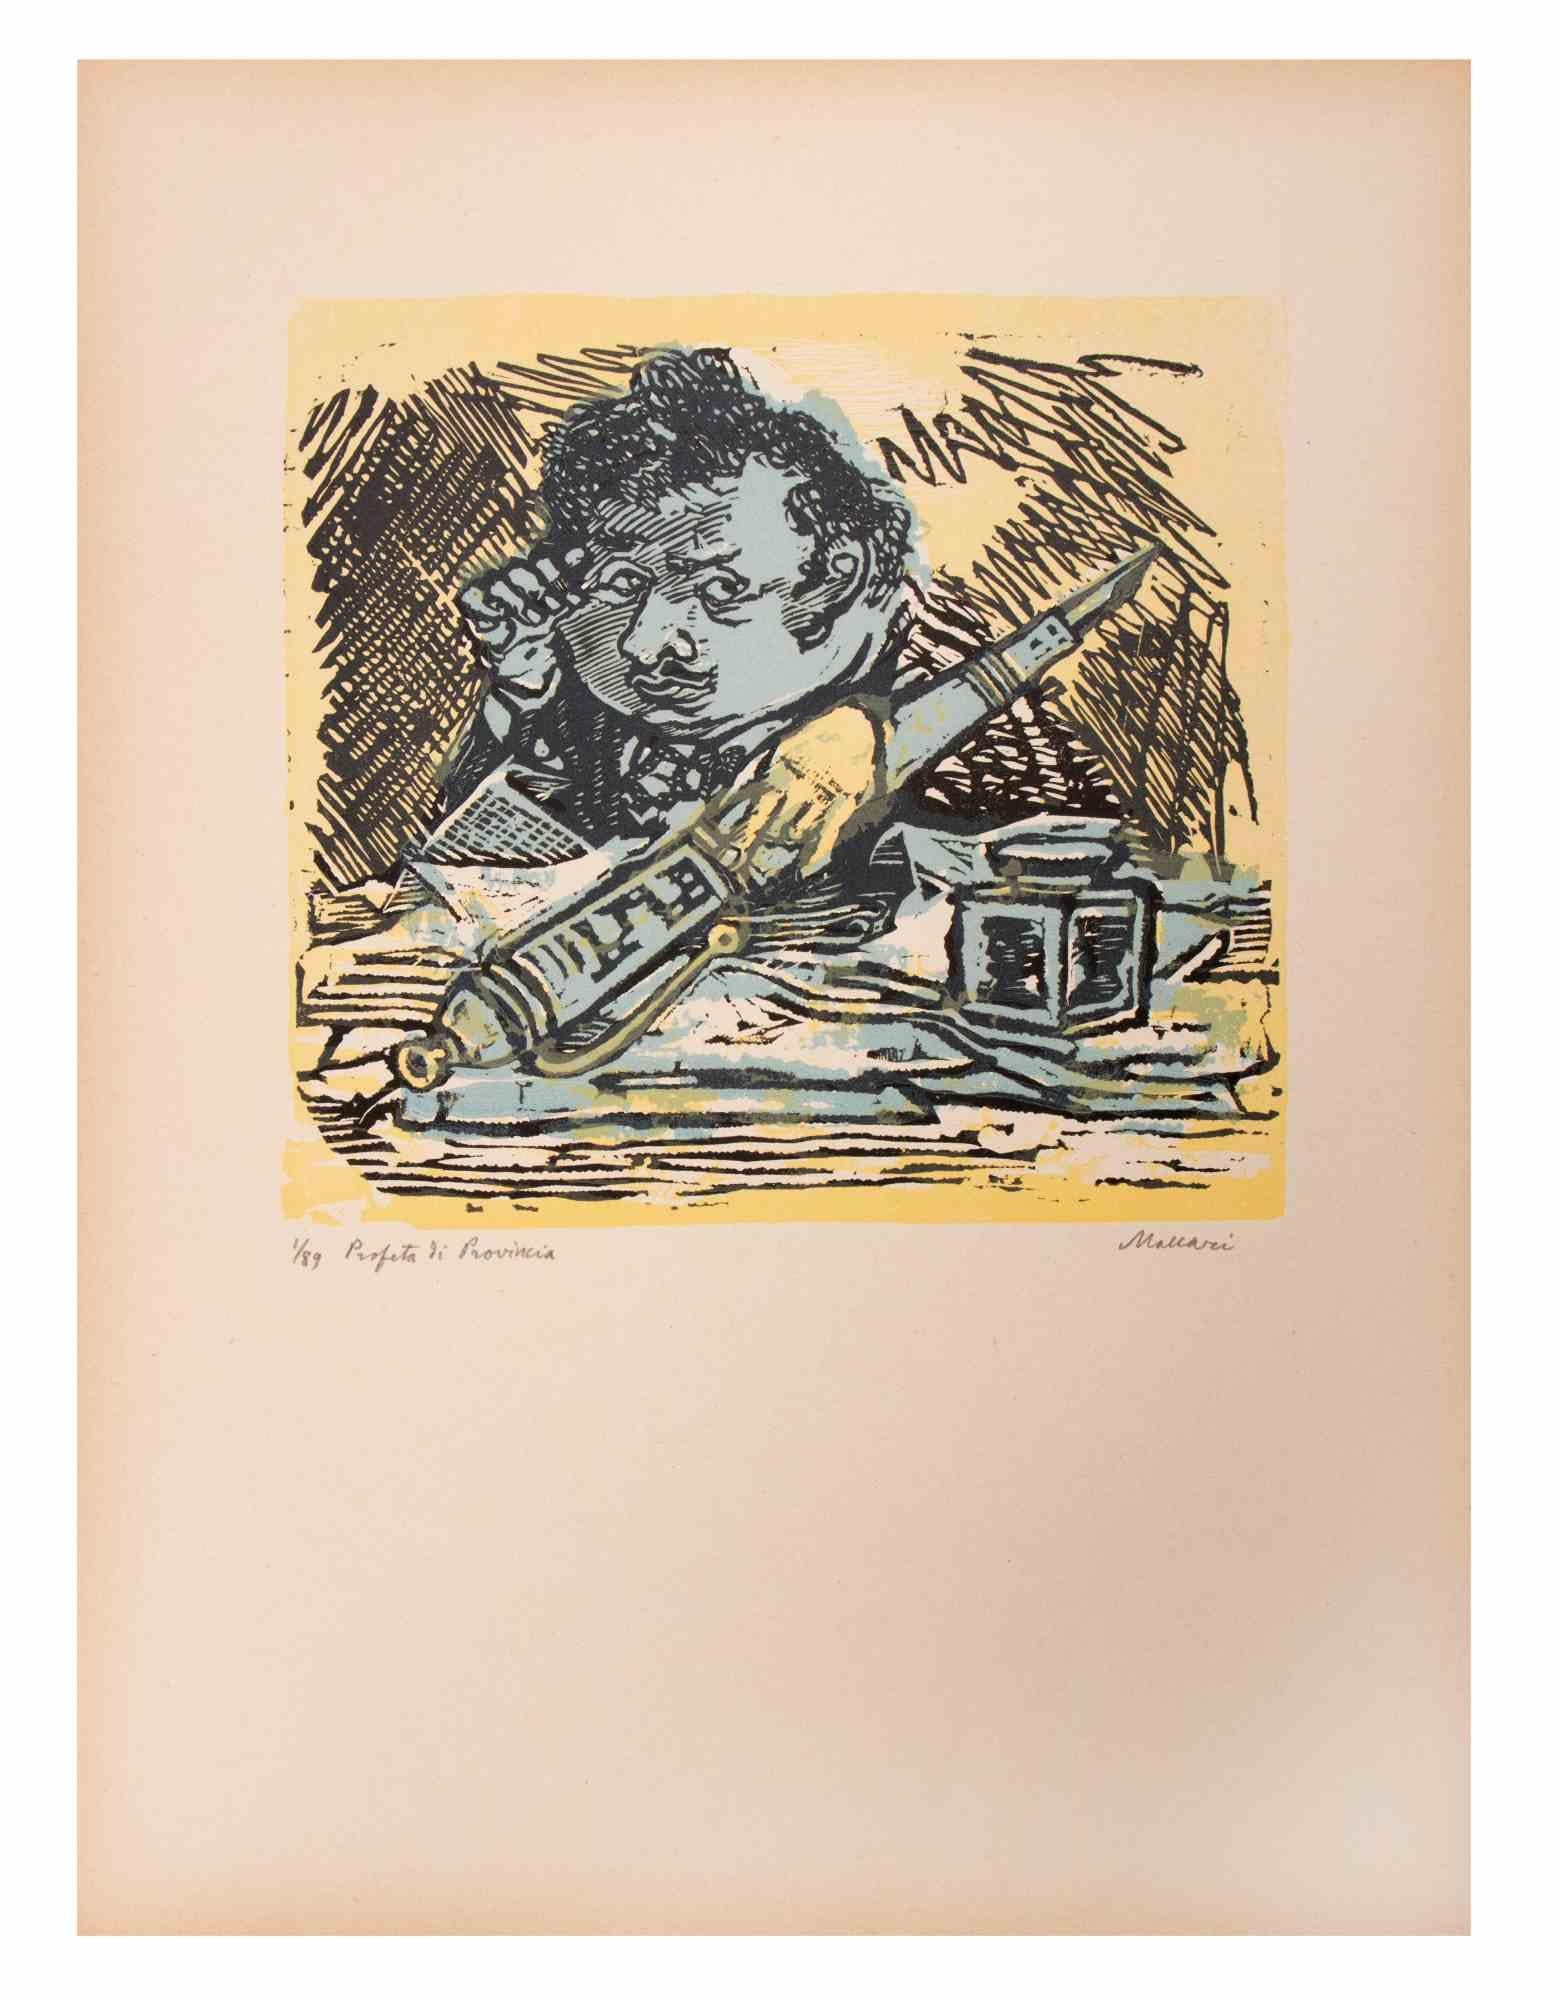 Provincial Predictor (Profeta di Provincia) is an Artwork realized by Mino Maccari  (1924-1989) in the Mid-20th Century.

Colored woodcut on paper. Hand-signed on the lower, numbered 1/89 specimens and titled on the left margin.

Good